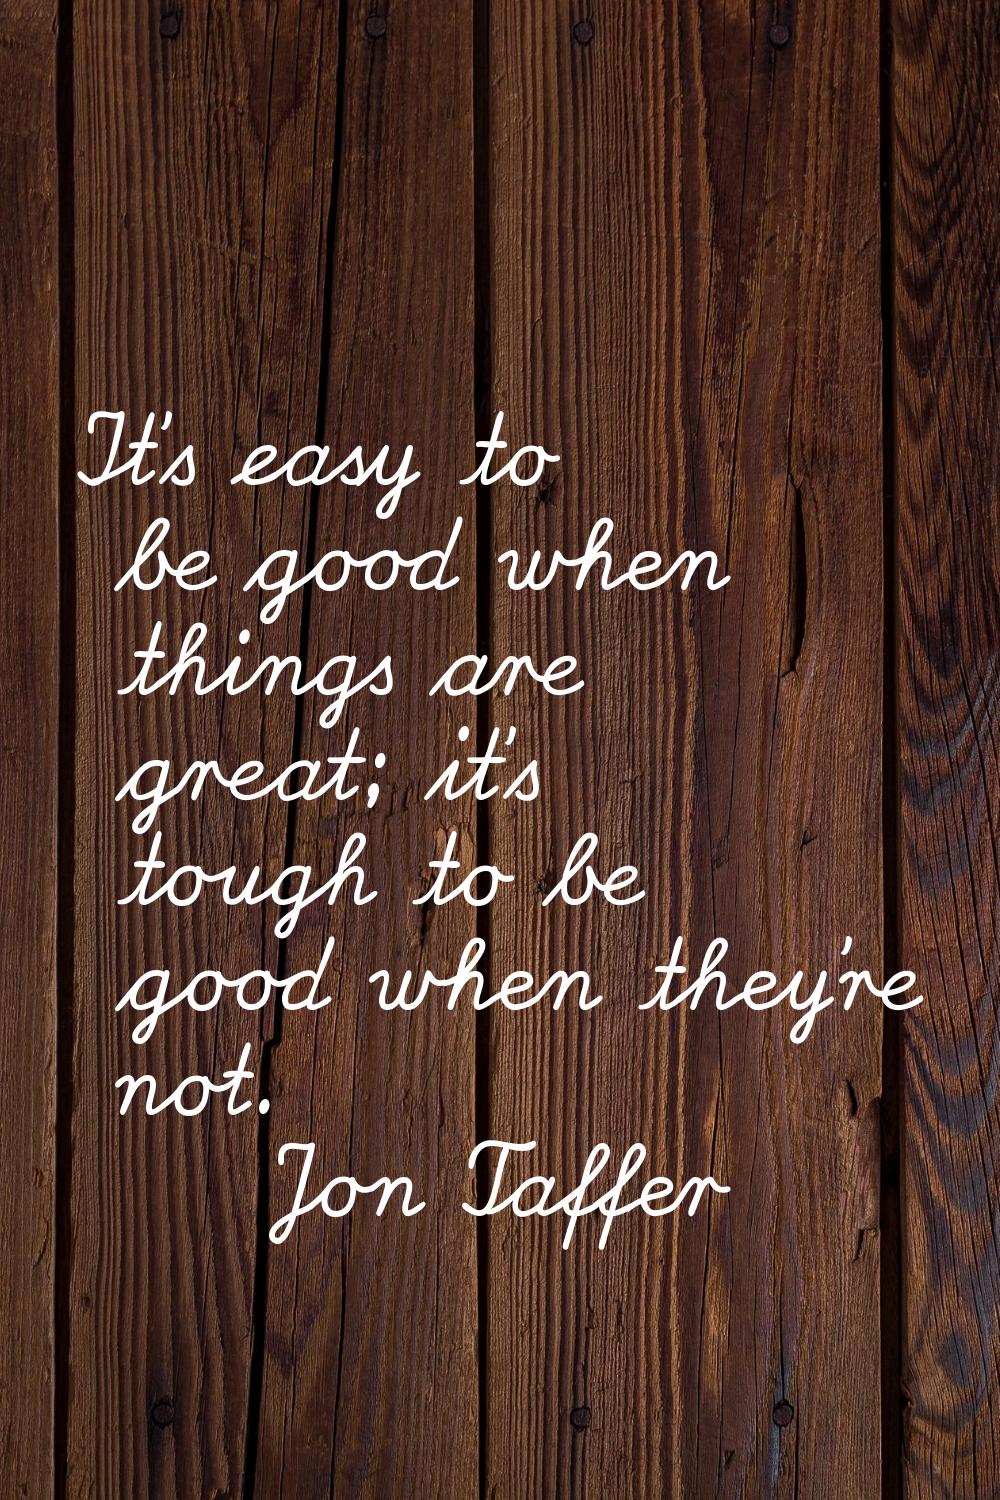 It's easy to be good when things are great; it's tough to be good when they're not.